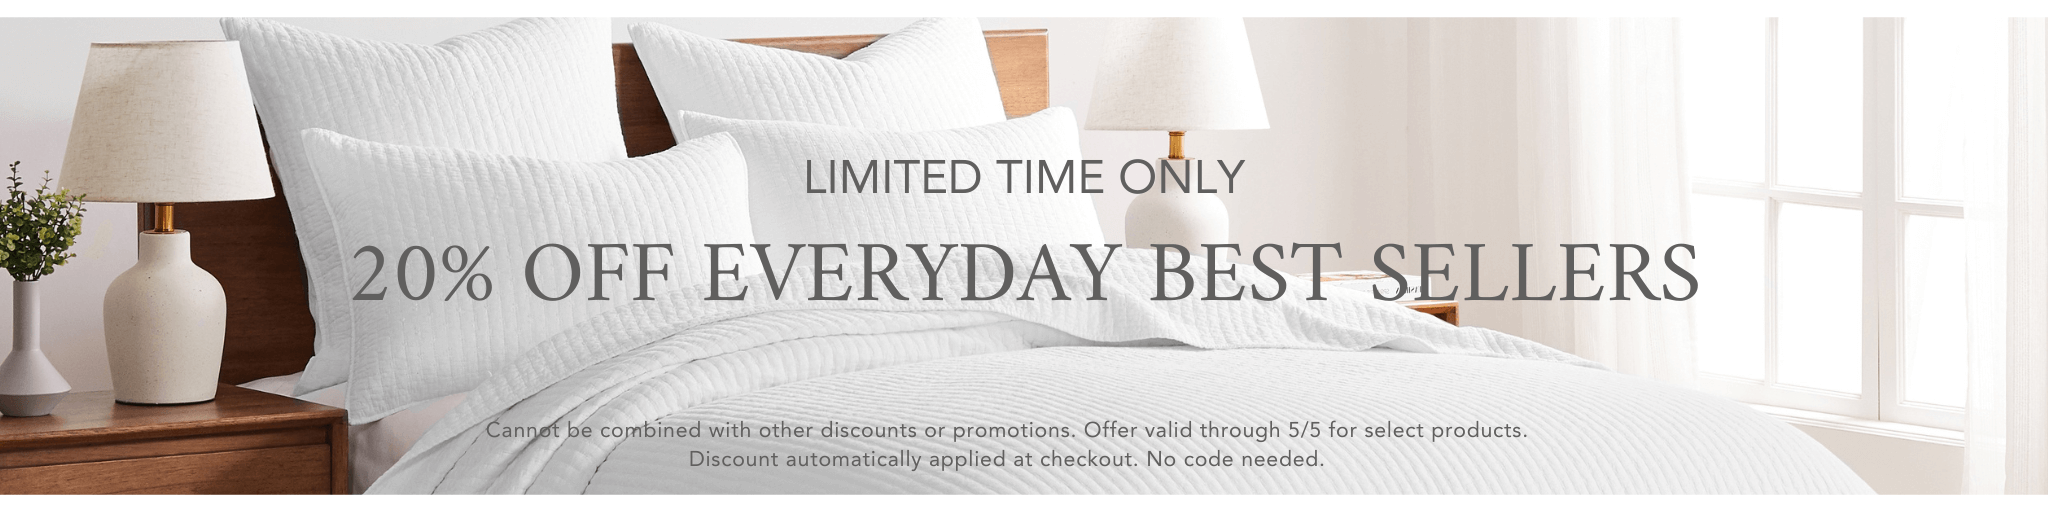 Limited time only: 20% Off Everyday Best Sellers through 5/5